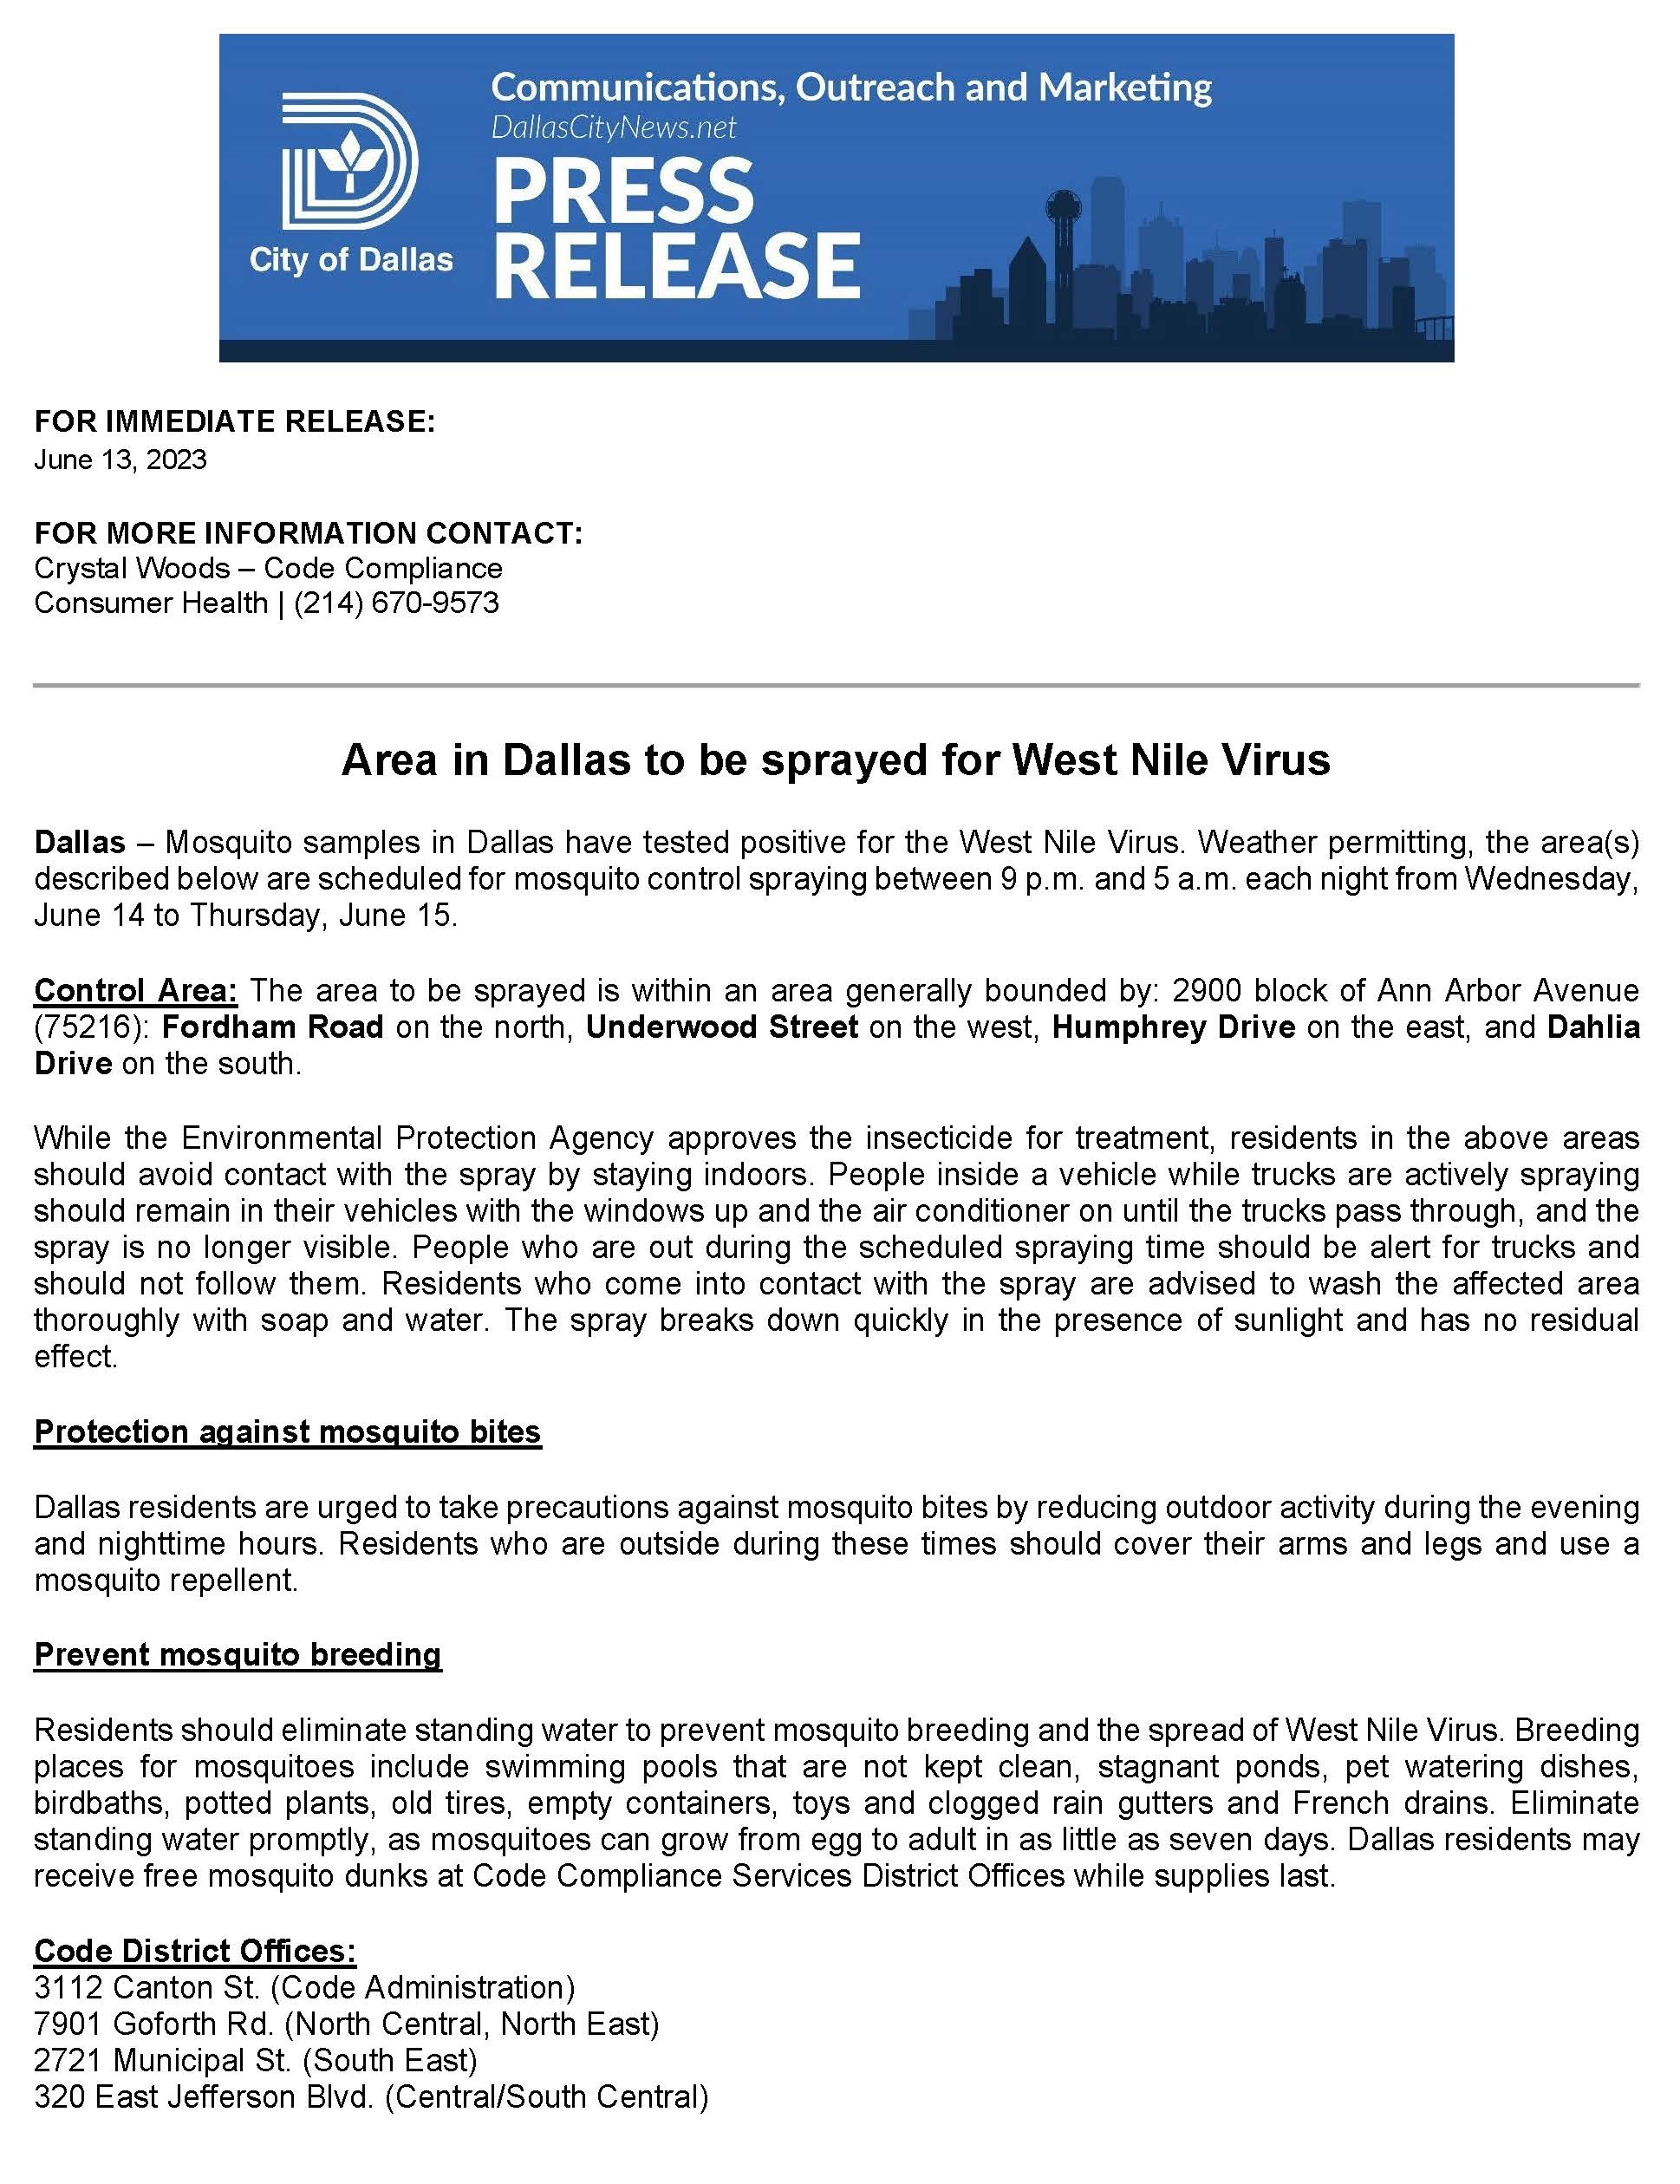 West Nile Virus in District 4 - FOR IMMEDIATE RELEASE_Page_1.jpg